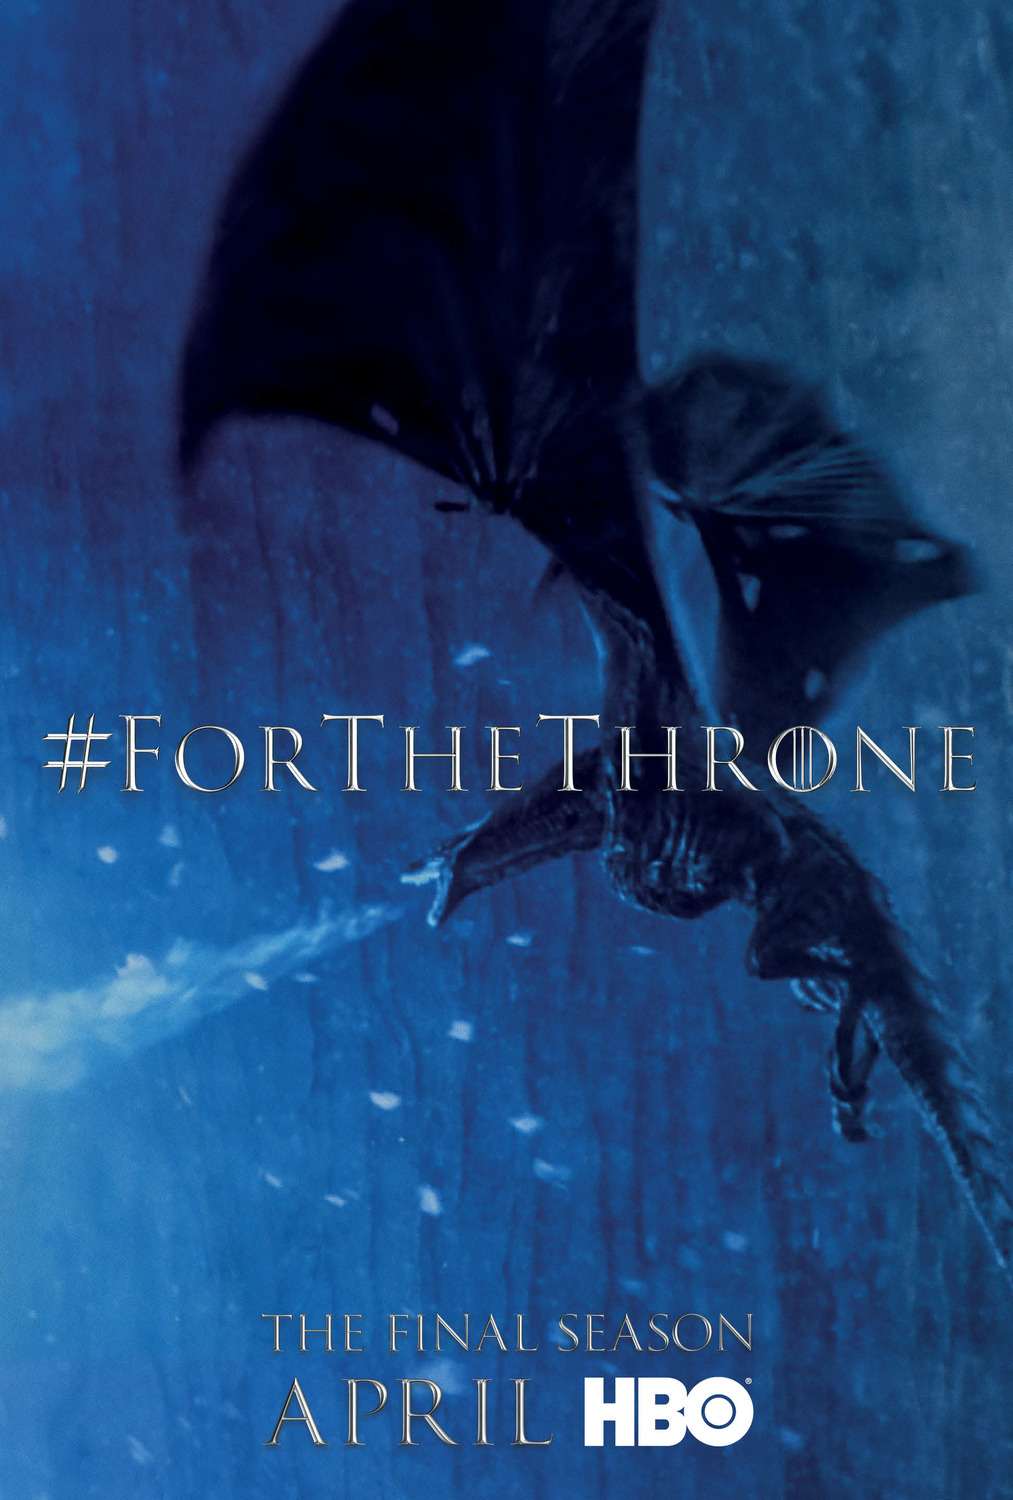 Extra Large TV Poster Image for Game of Thrones (#97 of 125)